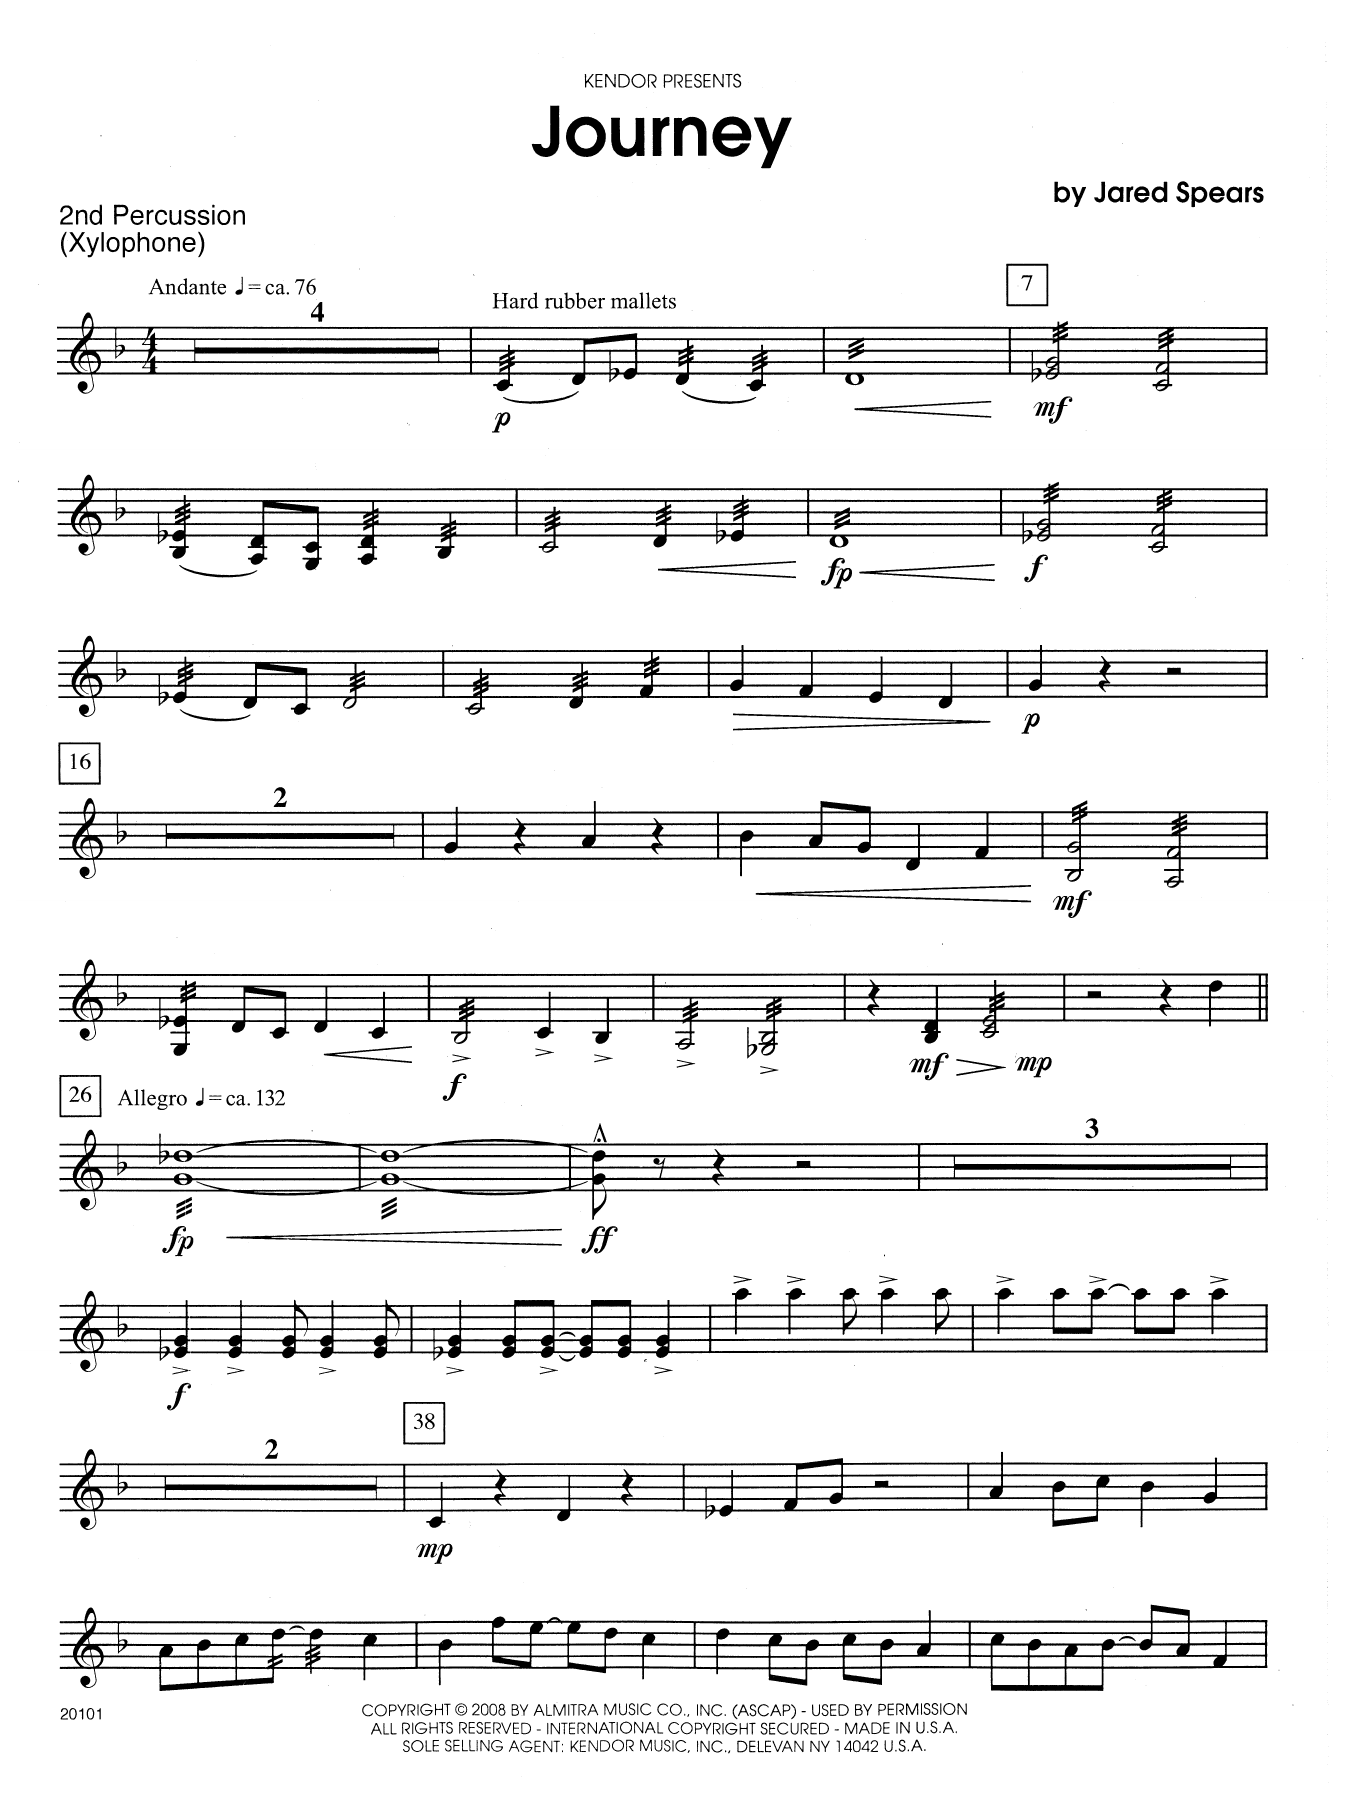 Download Jared Spears Journey - Percussion 2 Sheet Music